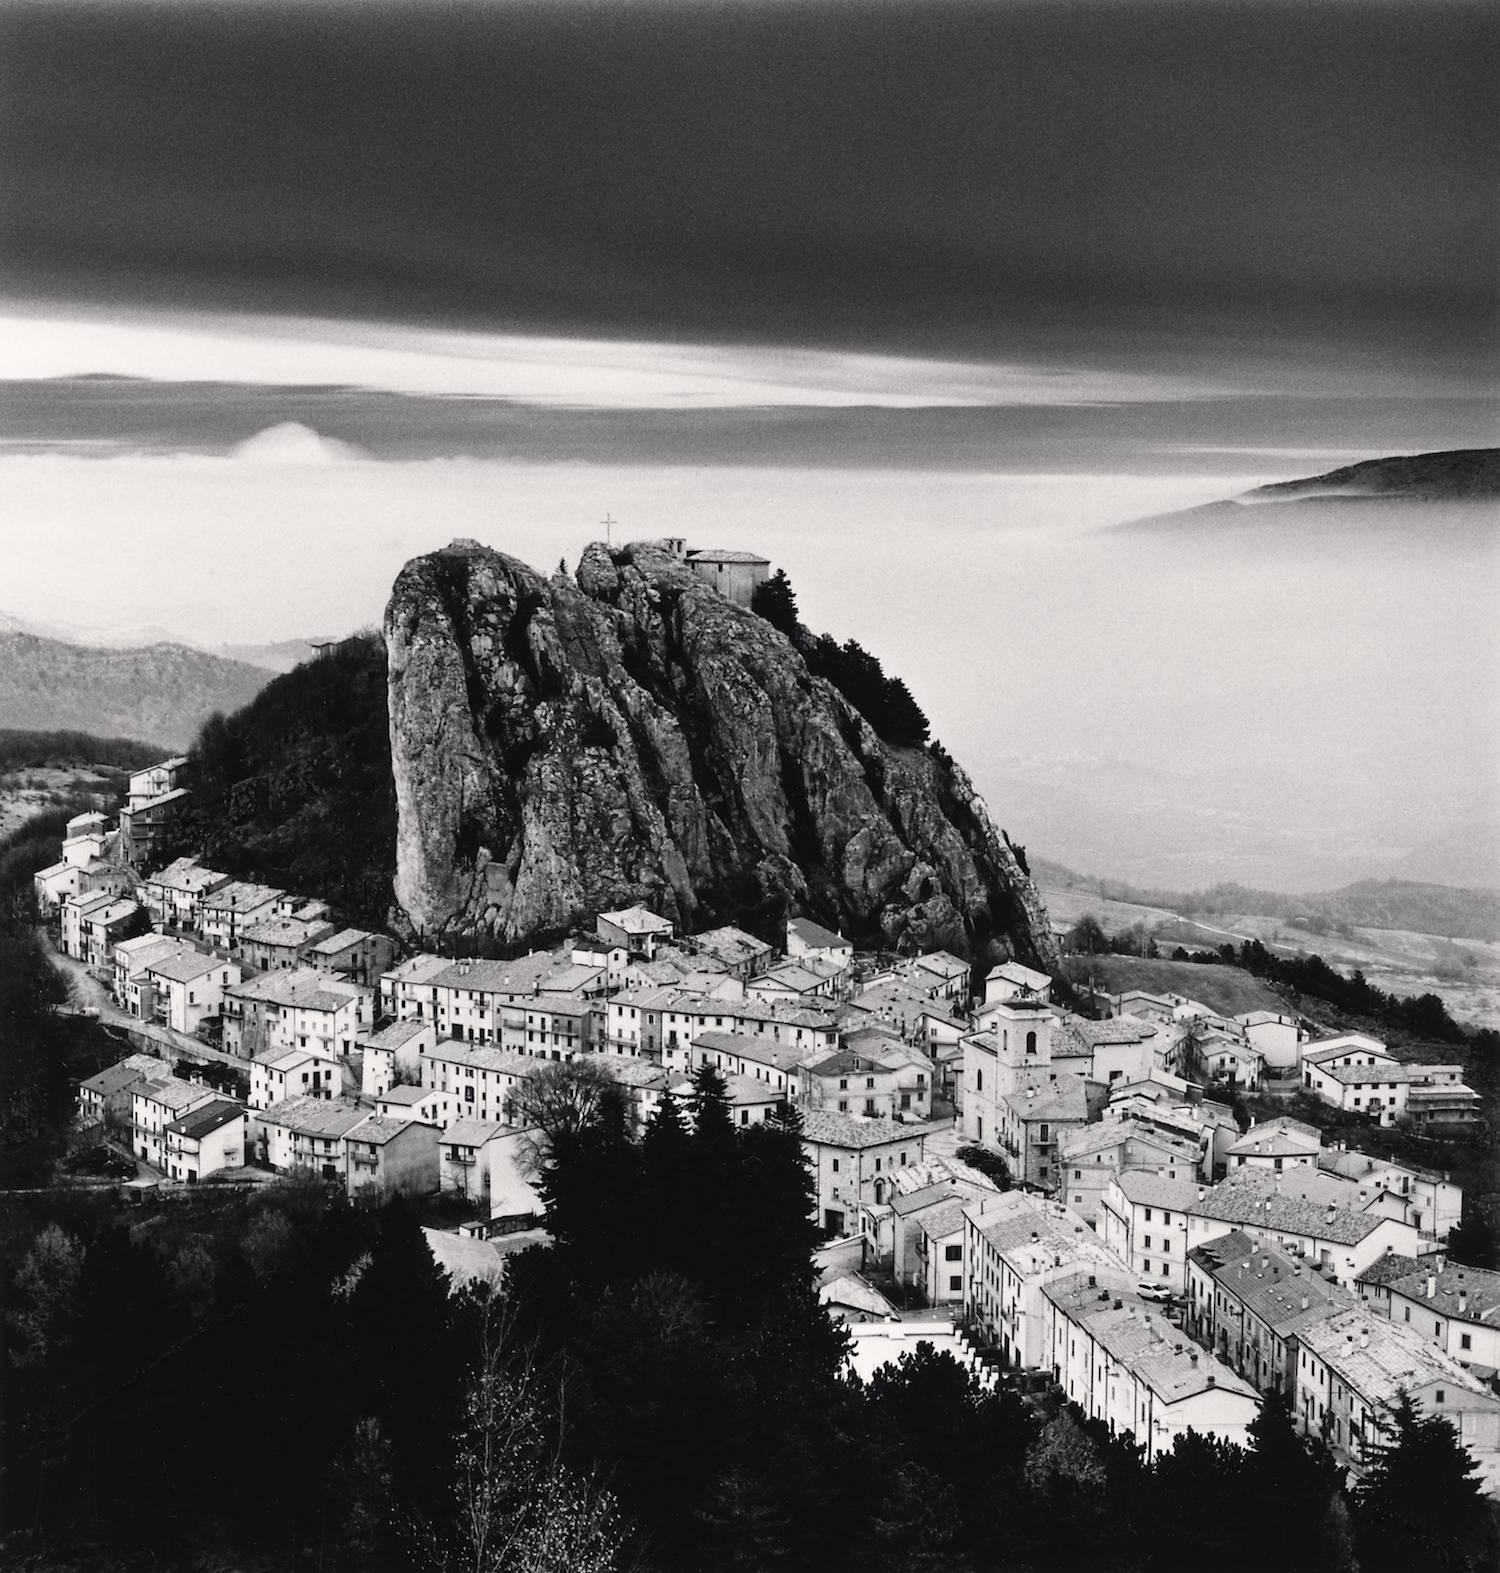 Michael Kenna Black and White Photograph - Approaching Clouds, Pizzoferato, Abruzzo, Italy